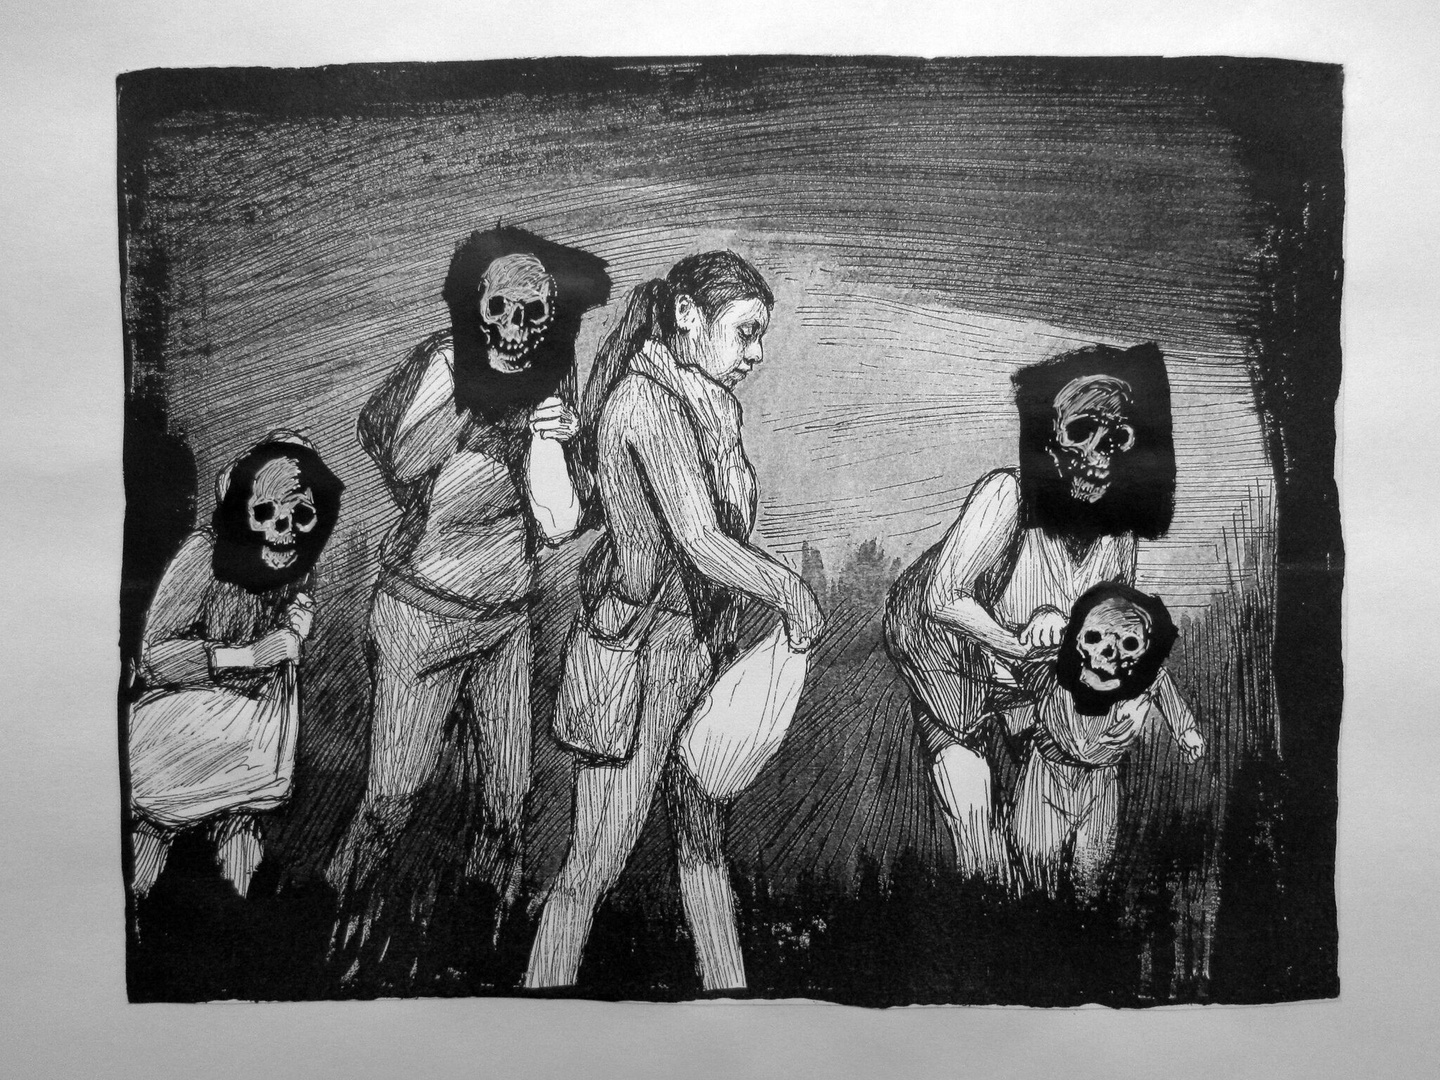 Black-and-white stop-motion drawing animation featuring an individual with a satchel walking among four other individuals with skeleton heads.